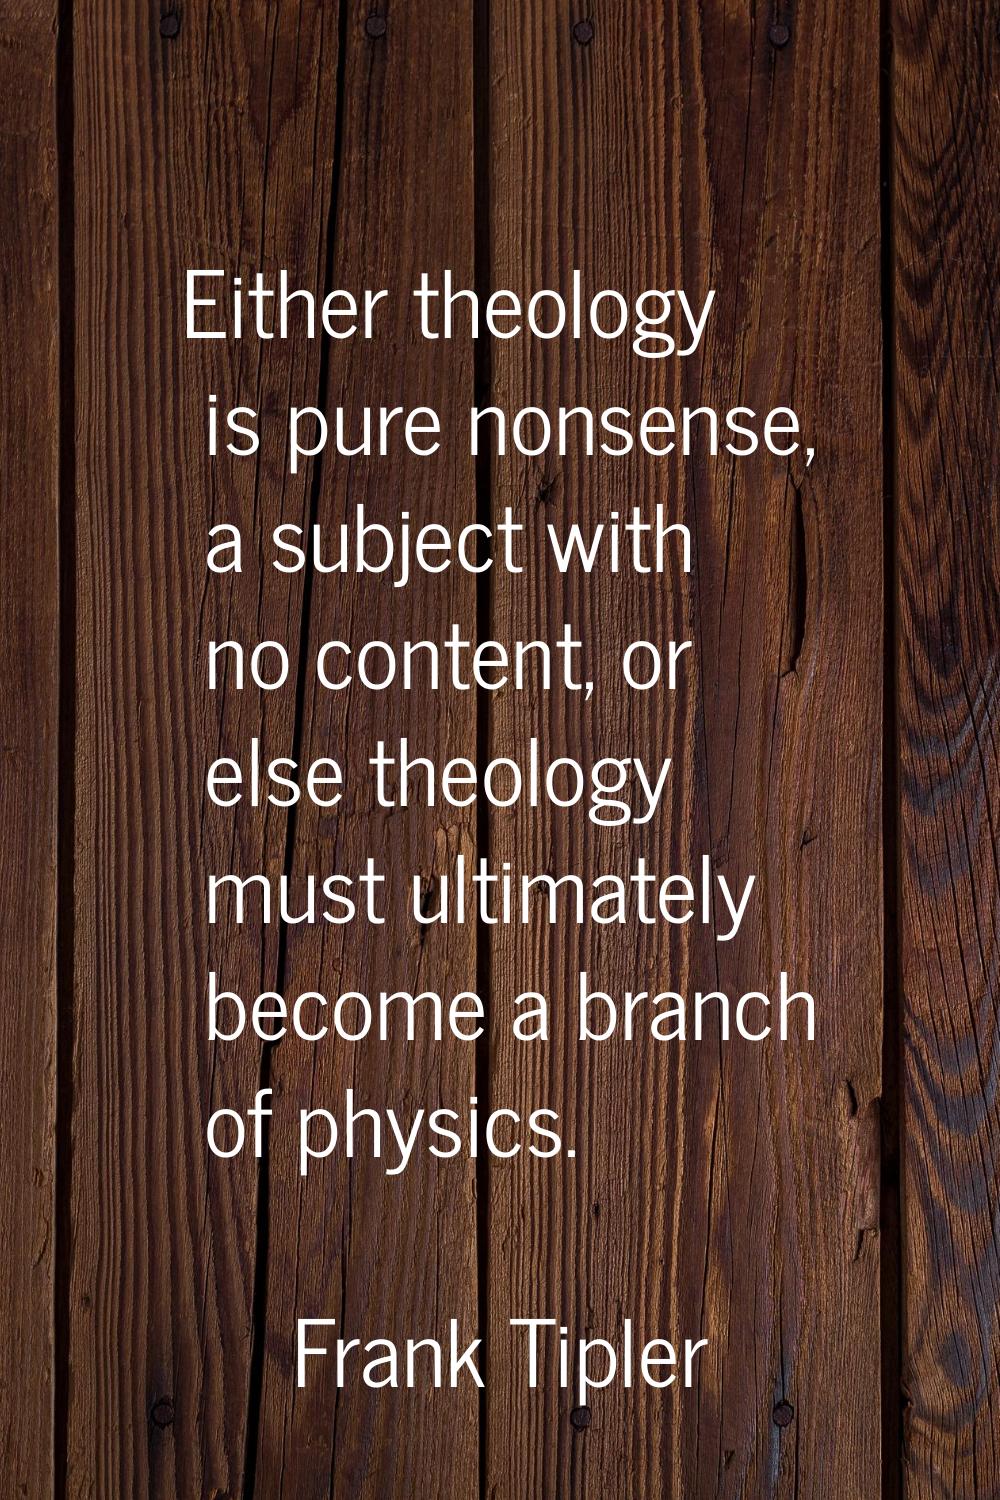 Either theology is pure nonsense, a subject with no content, or else theology must ultimately becom